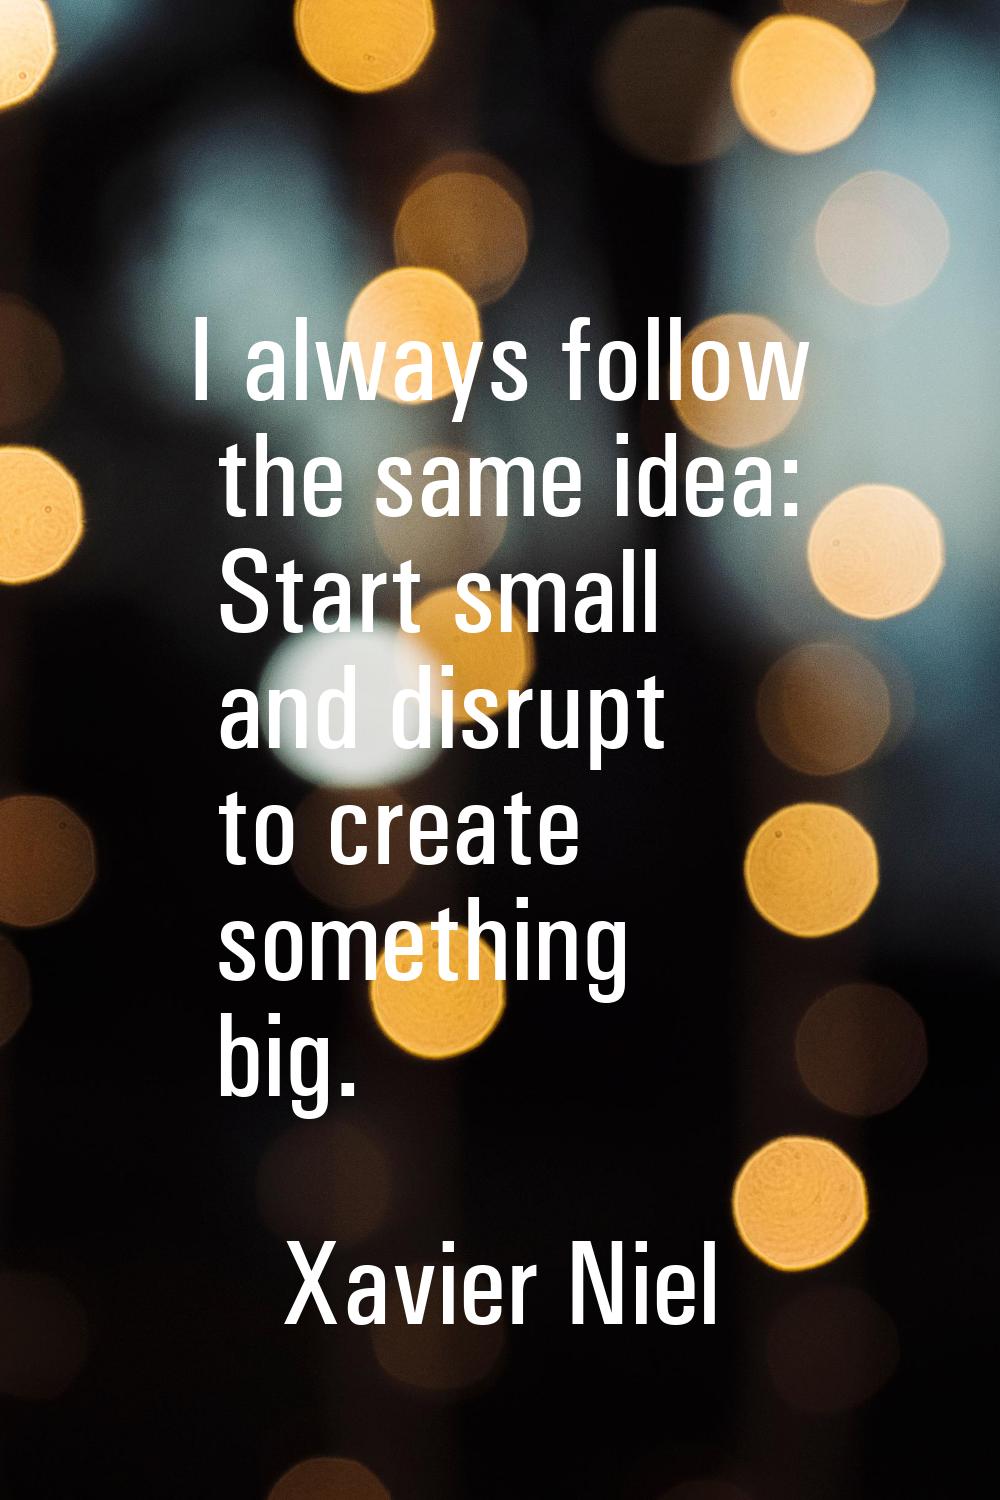 I always follow the same idea: Start small and disrupt to create something big.